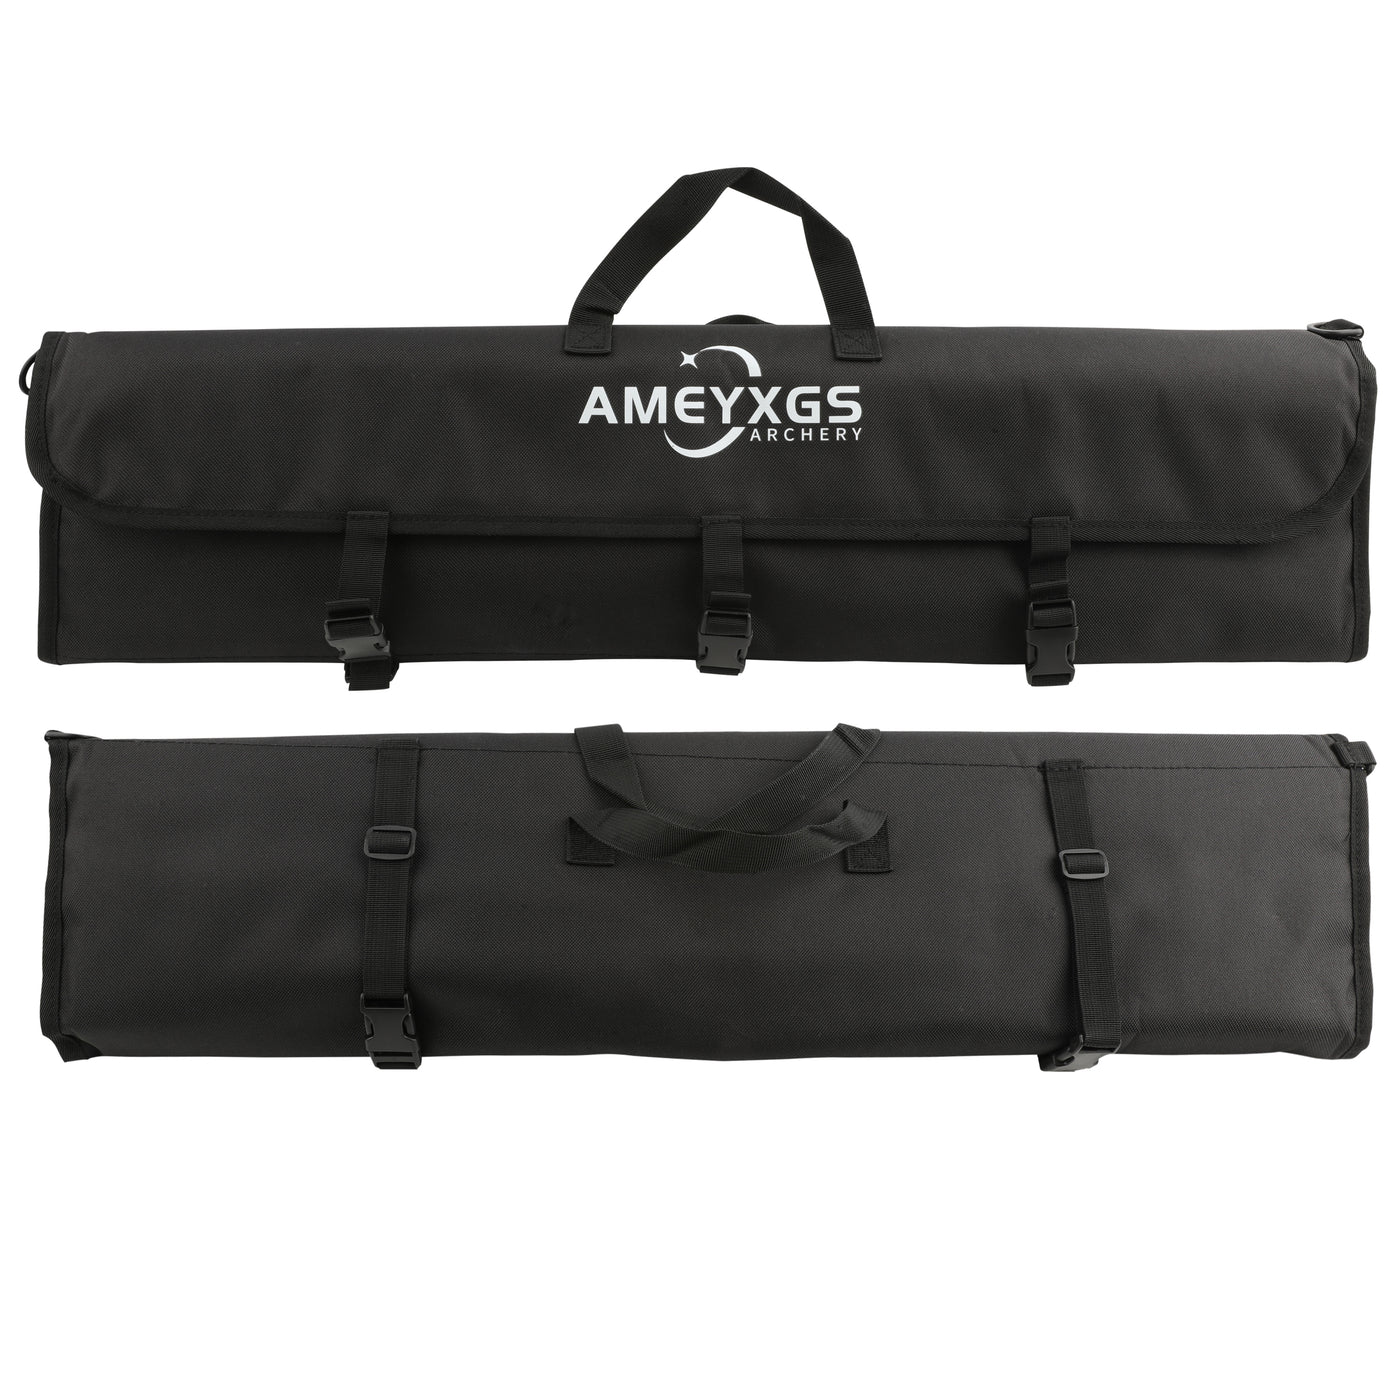 AMEYXGS Recurve Bow Bag Archery Case Shoulder Handle Carrying